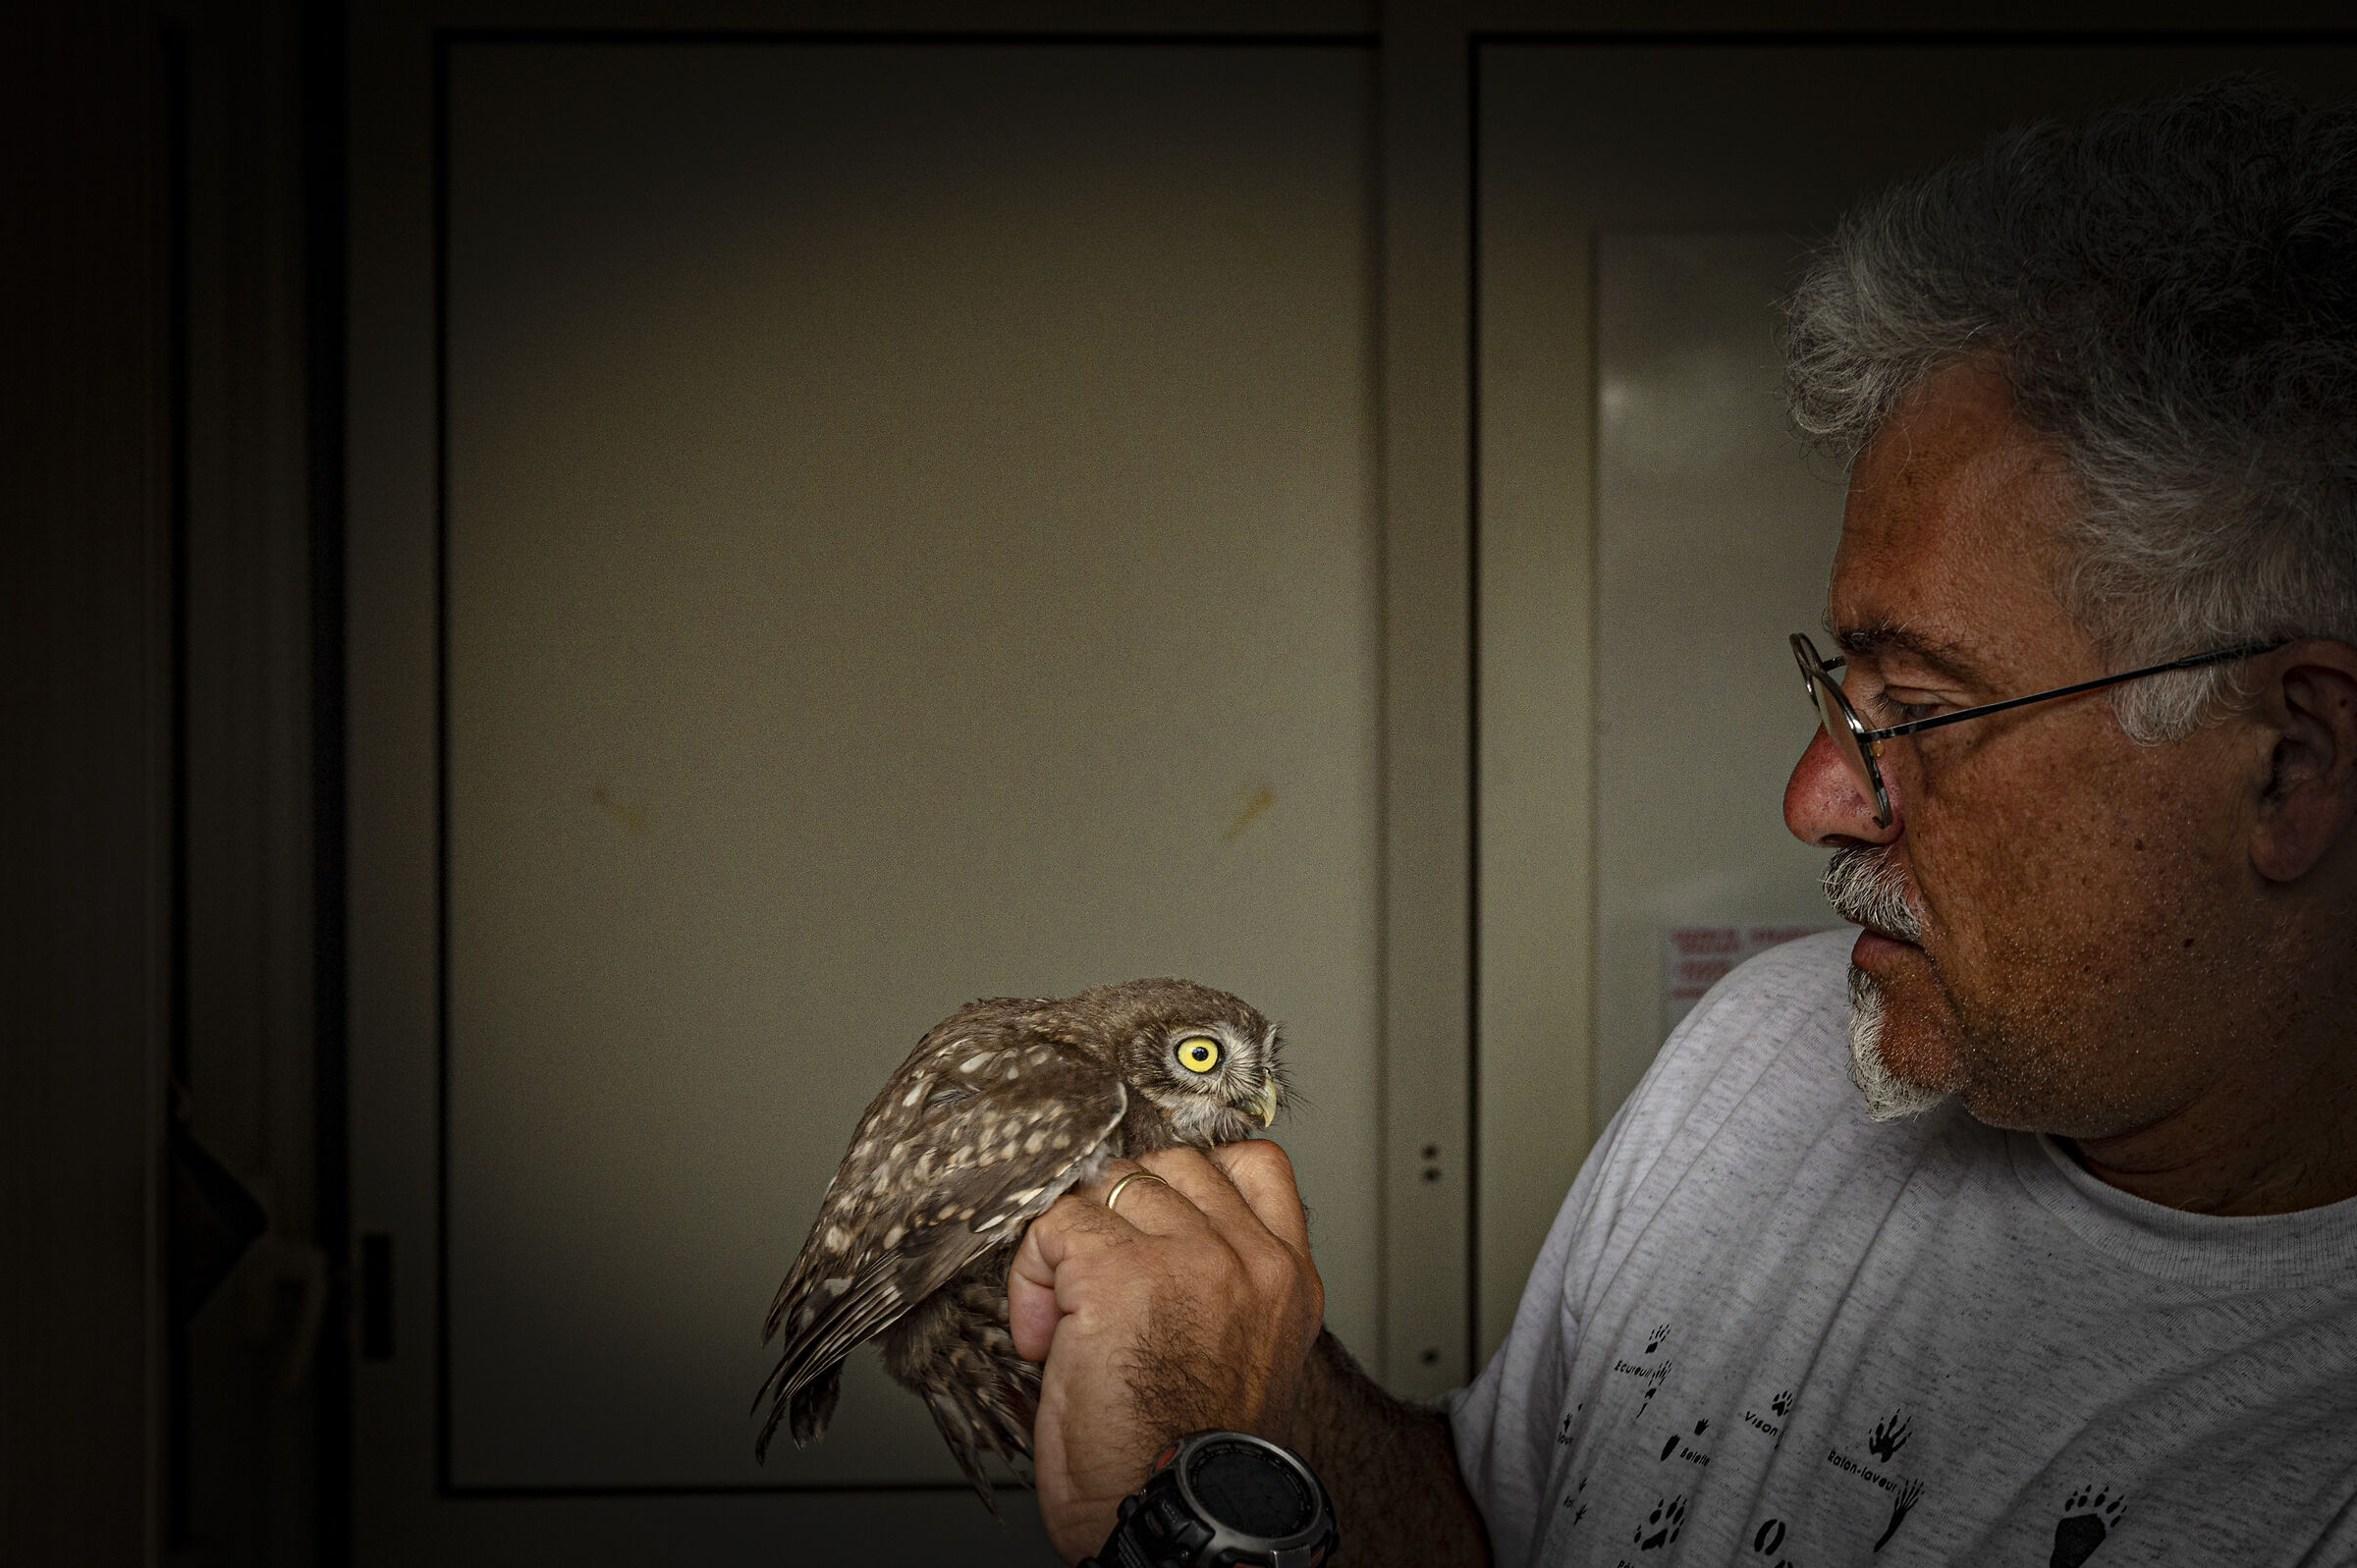 giancarlo takes care of a small owl...